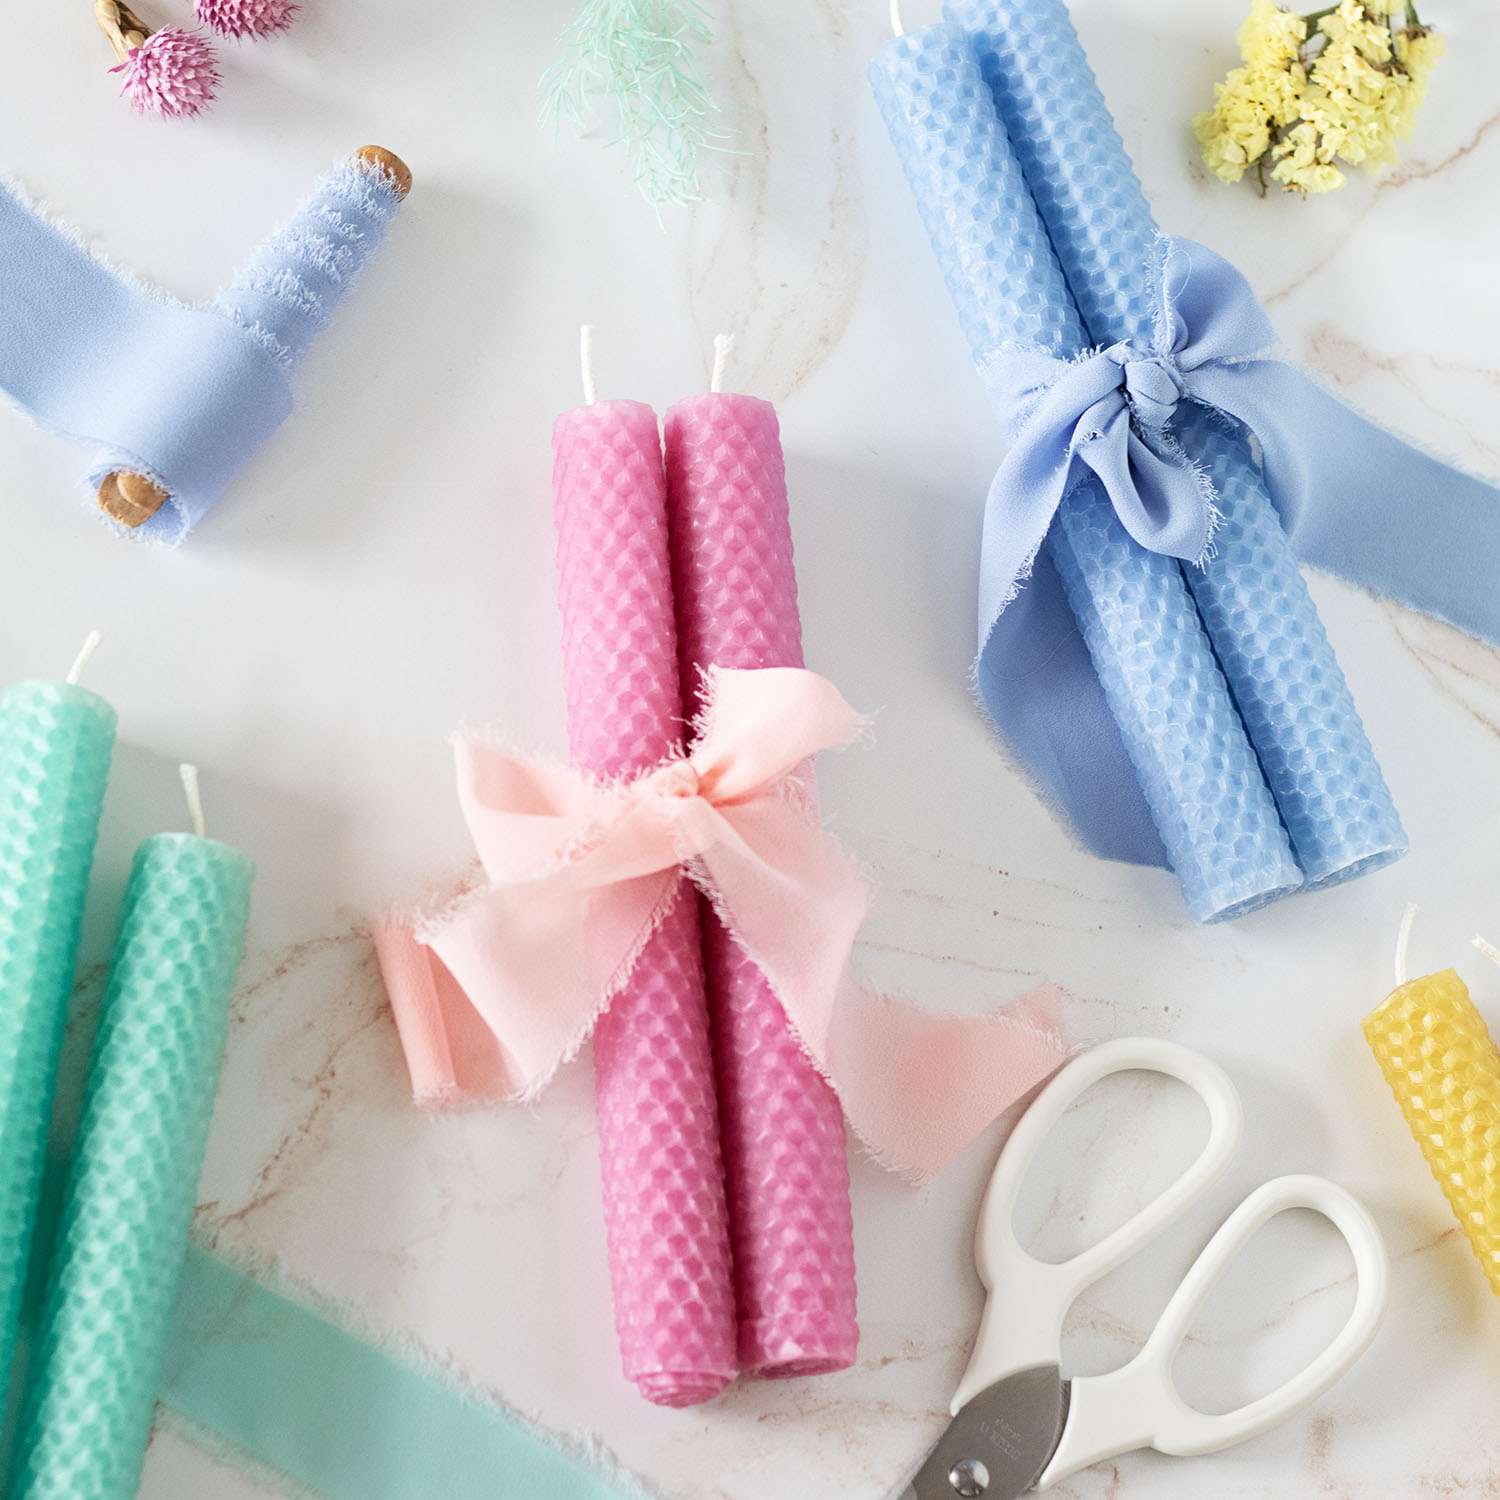 These pastel beeswax sheet candles make a wonderful decoration for the home or for special occasions. And they are a beautiful stand alone handcrafted gift. Who wouldn't enjoy receiving a hand rolled candle?